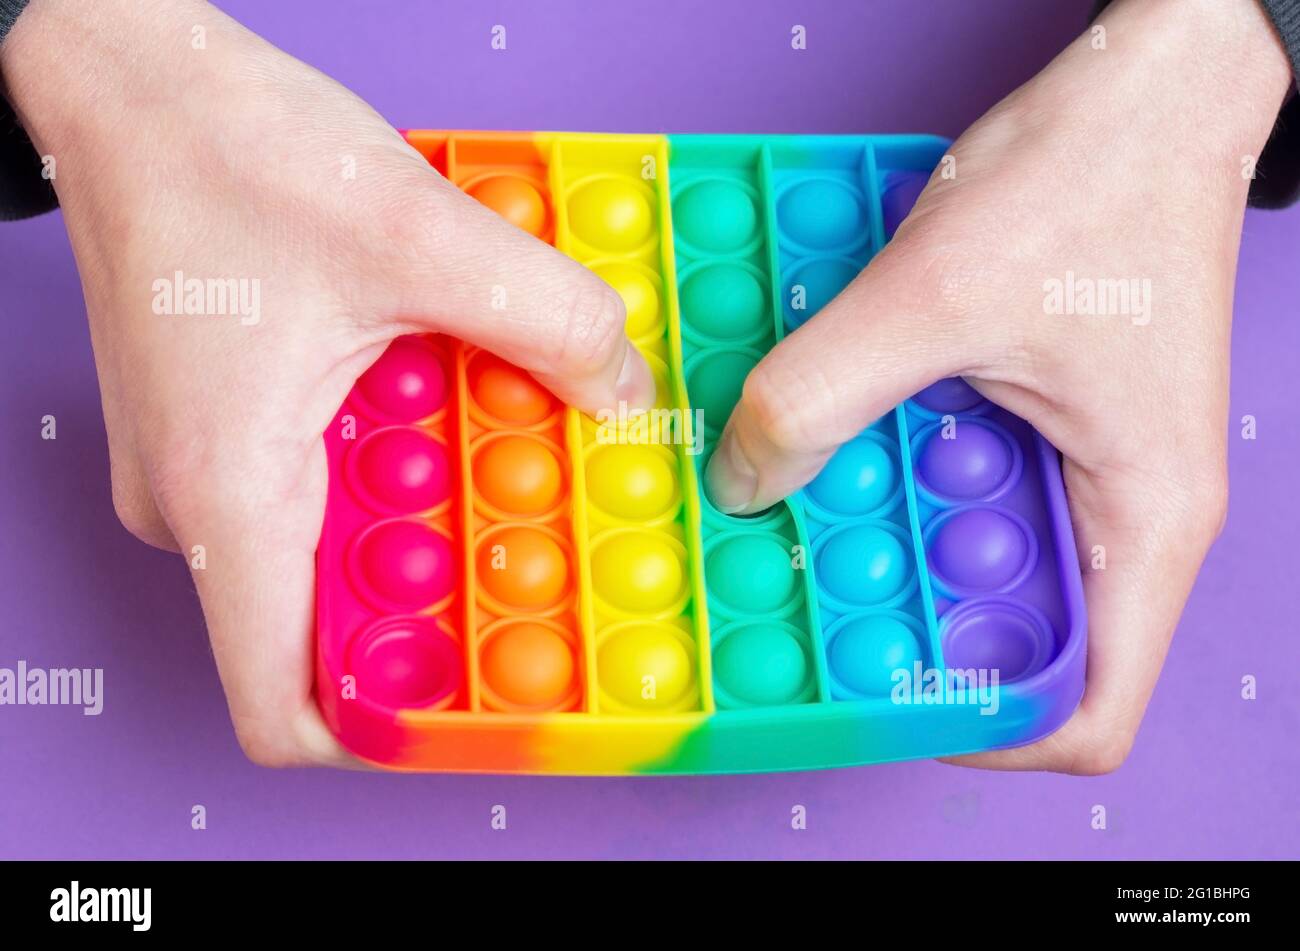 Woman play in sensory anti stress Pop It simple dimple in square shape toy. Push pop bubble flexible fidget sensory toy provide discharge. Stock Photo